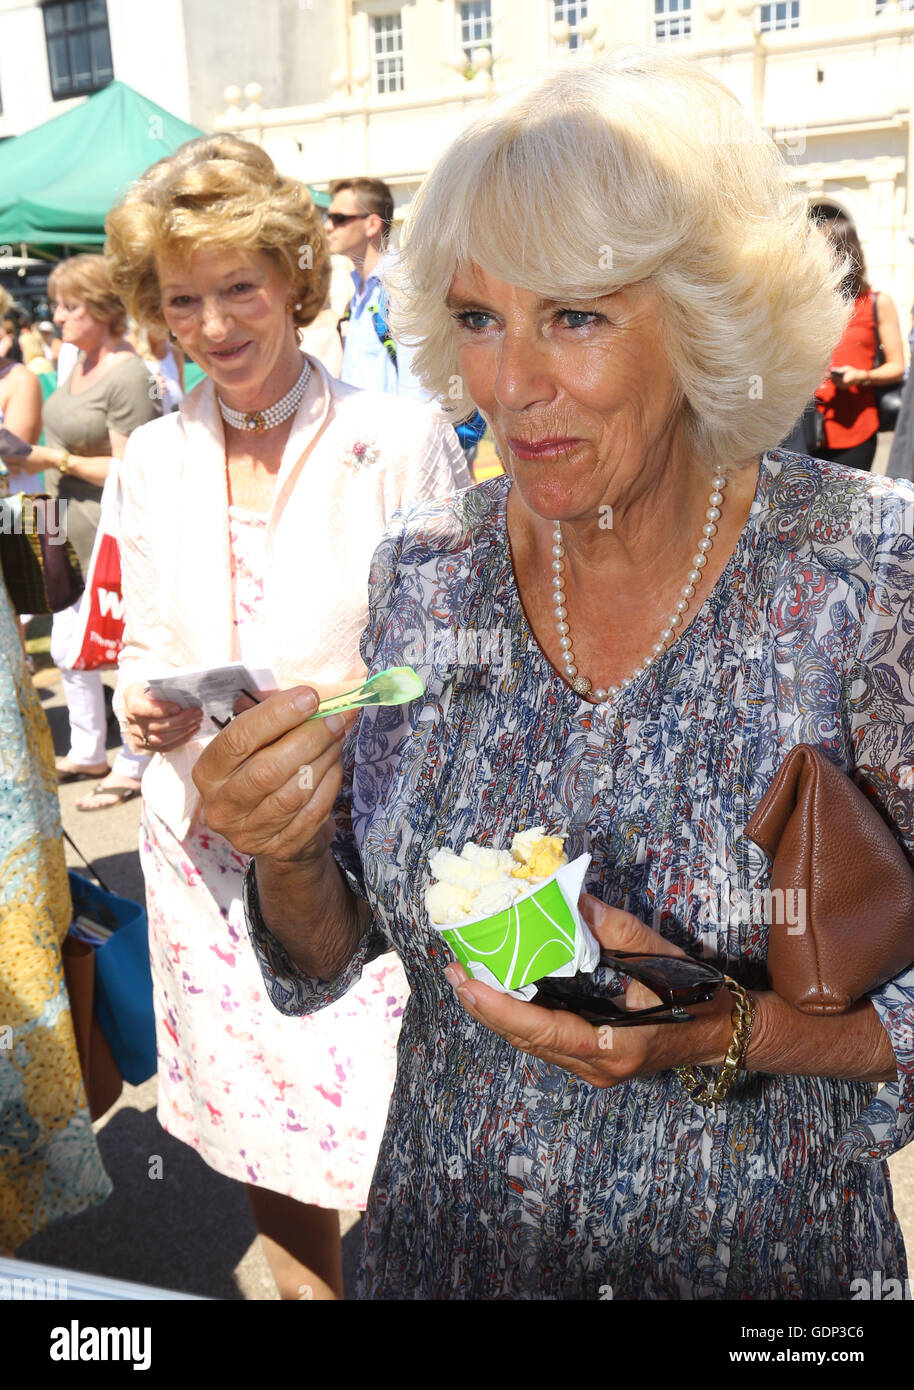 The Duchess of Cornwall enjoys an ice cream during a visit with her husband, the Prince of Wales, to the Taste of the West's 25th anniversary Food Fair in the grounds of Exeter Cathedral on the second day of their annual visit to the South West. Stock Photo